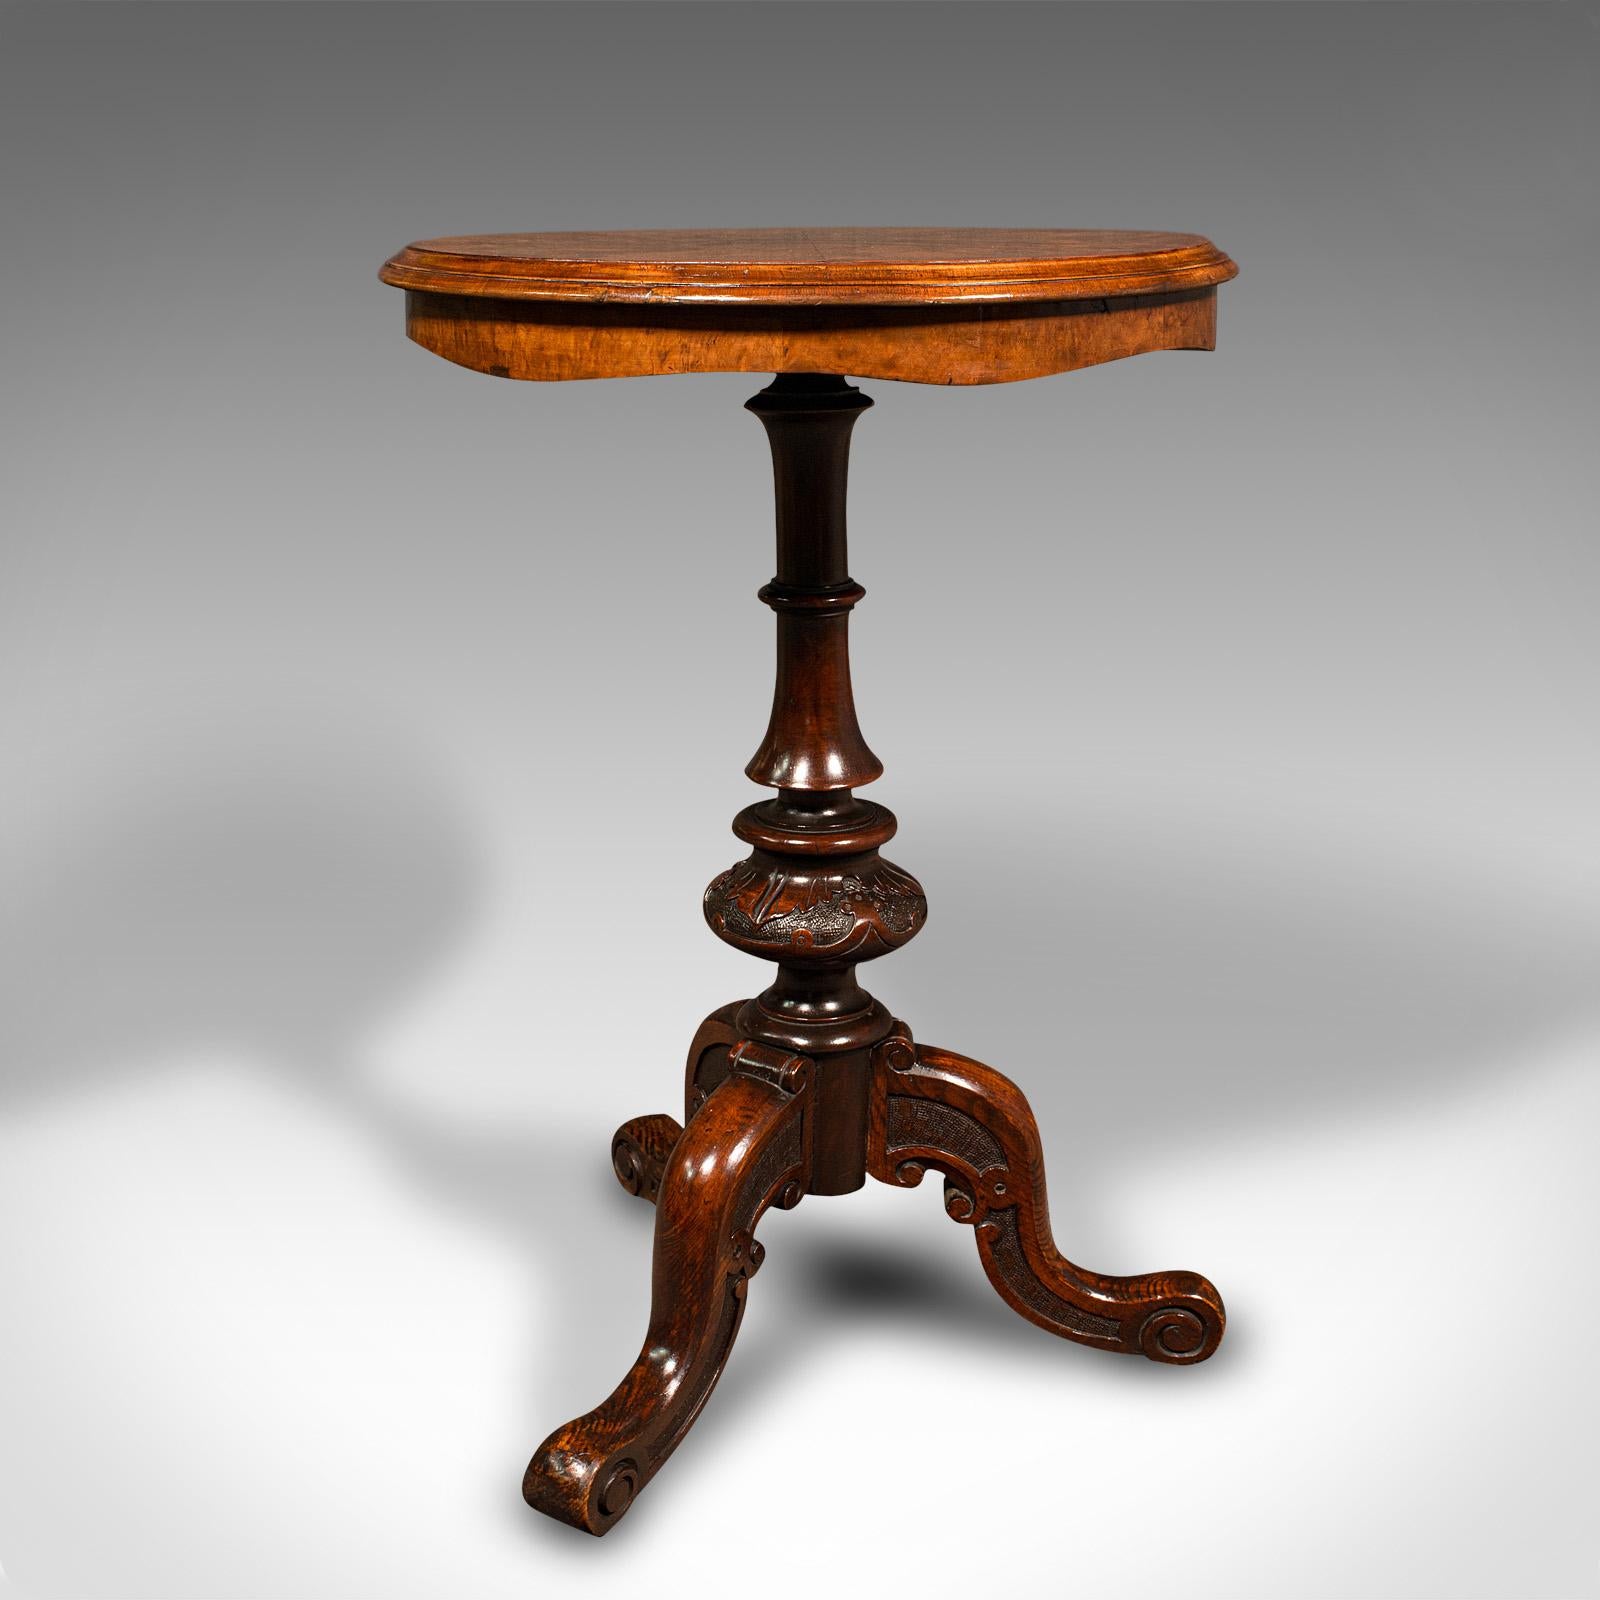 Antique Lamp Table, English Burr Walnut, Decorative, Occasional, Early Victorian In Good Condition For Sale In Hele, Devon, GB